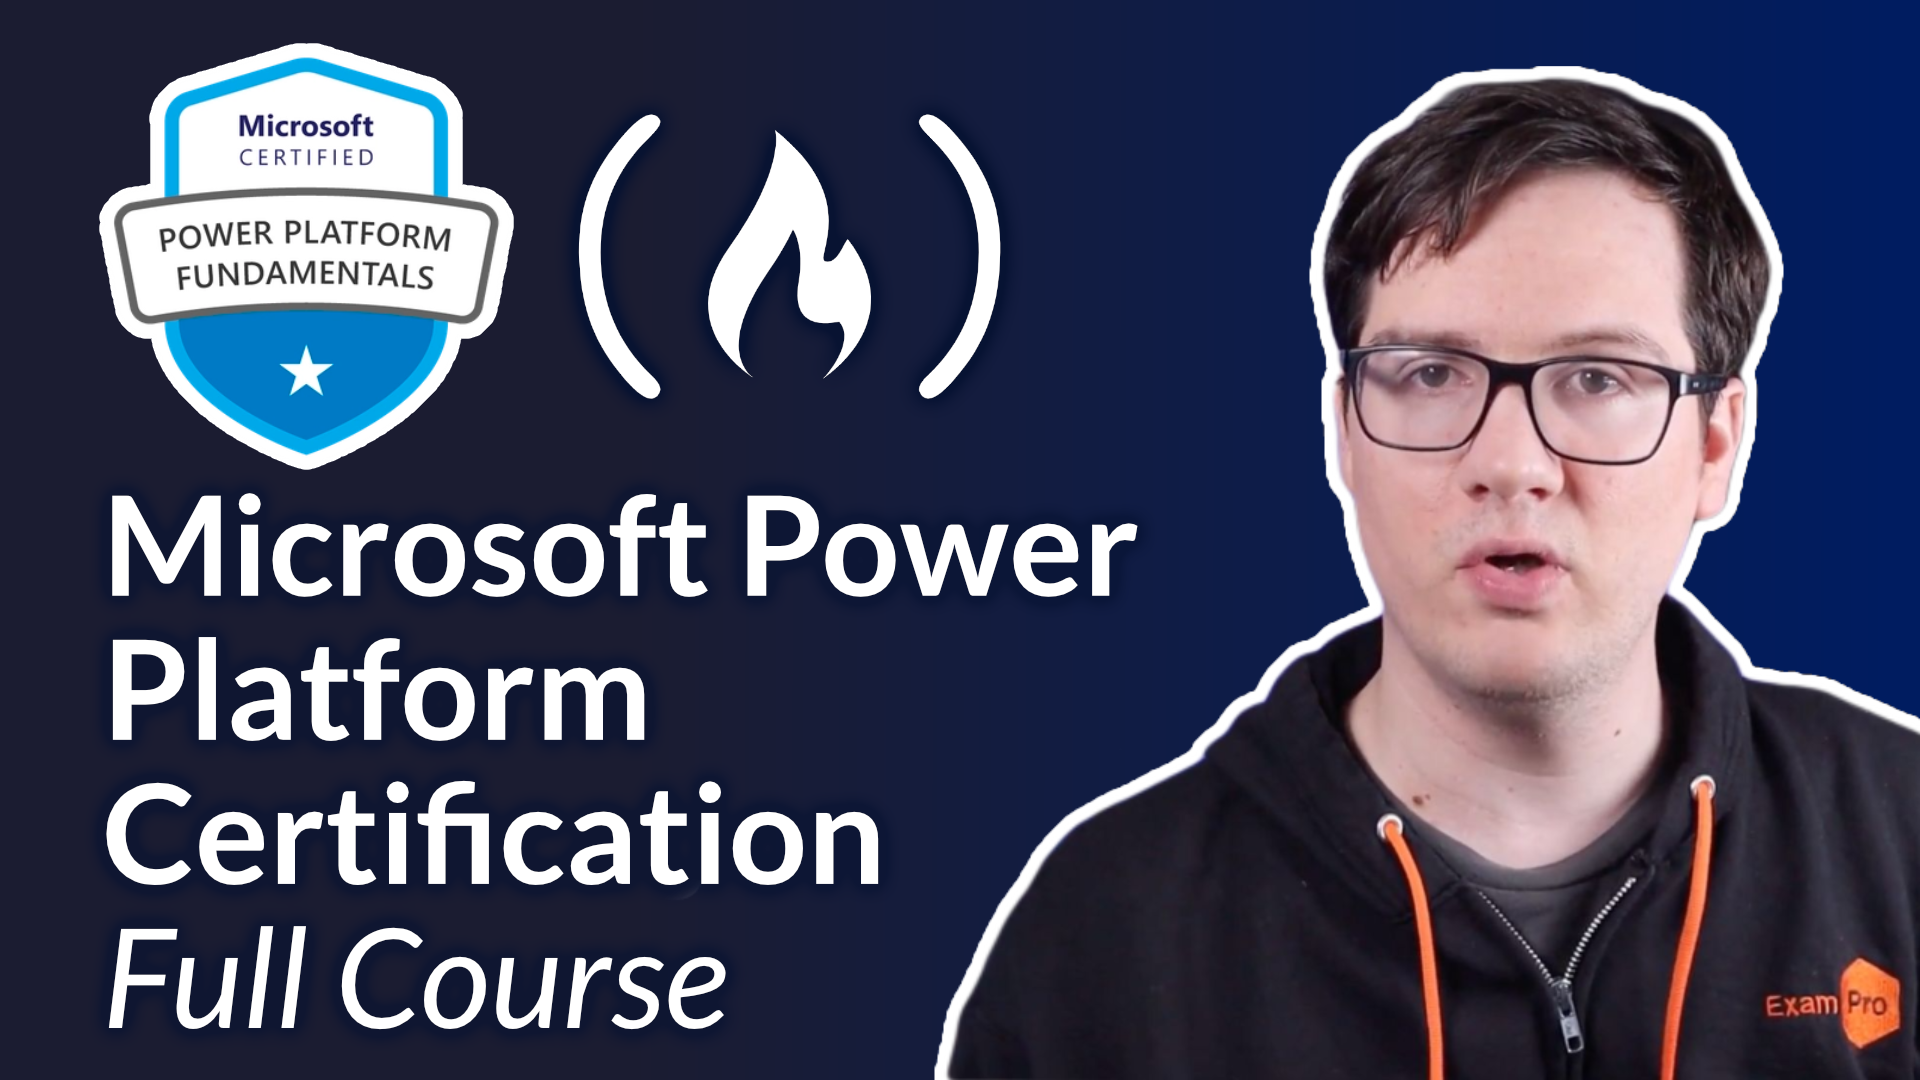 Microsoft Power Platform Fundamentals Certification (PL-900) – Pass the Exam With This Free 4-Hour Course